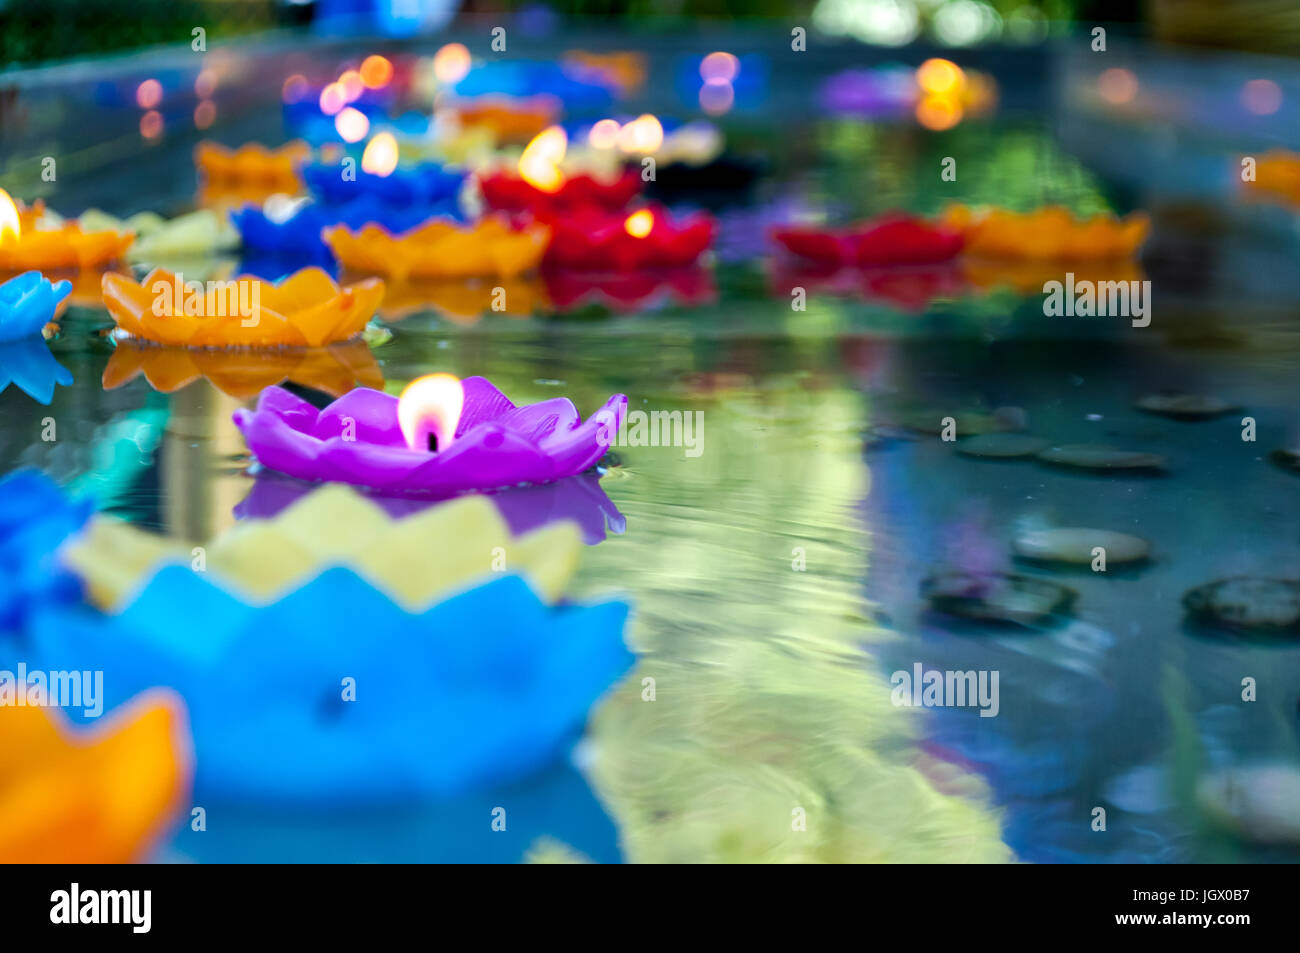 Lotus shape candle lit and float on water as sacred offering found in several religions and parts of the world. May be offering to gods, respect perso Stock Photo